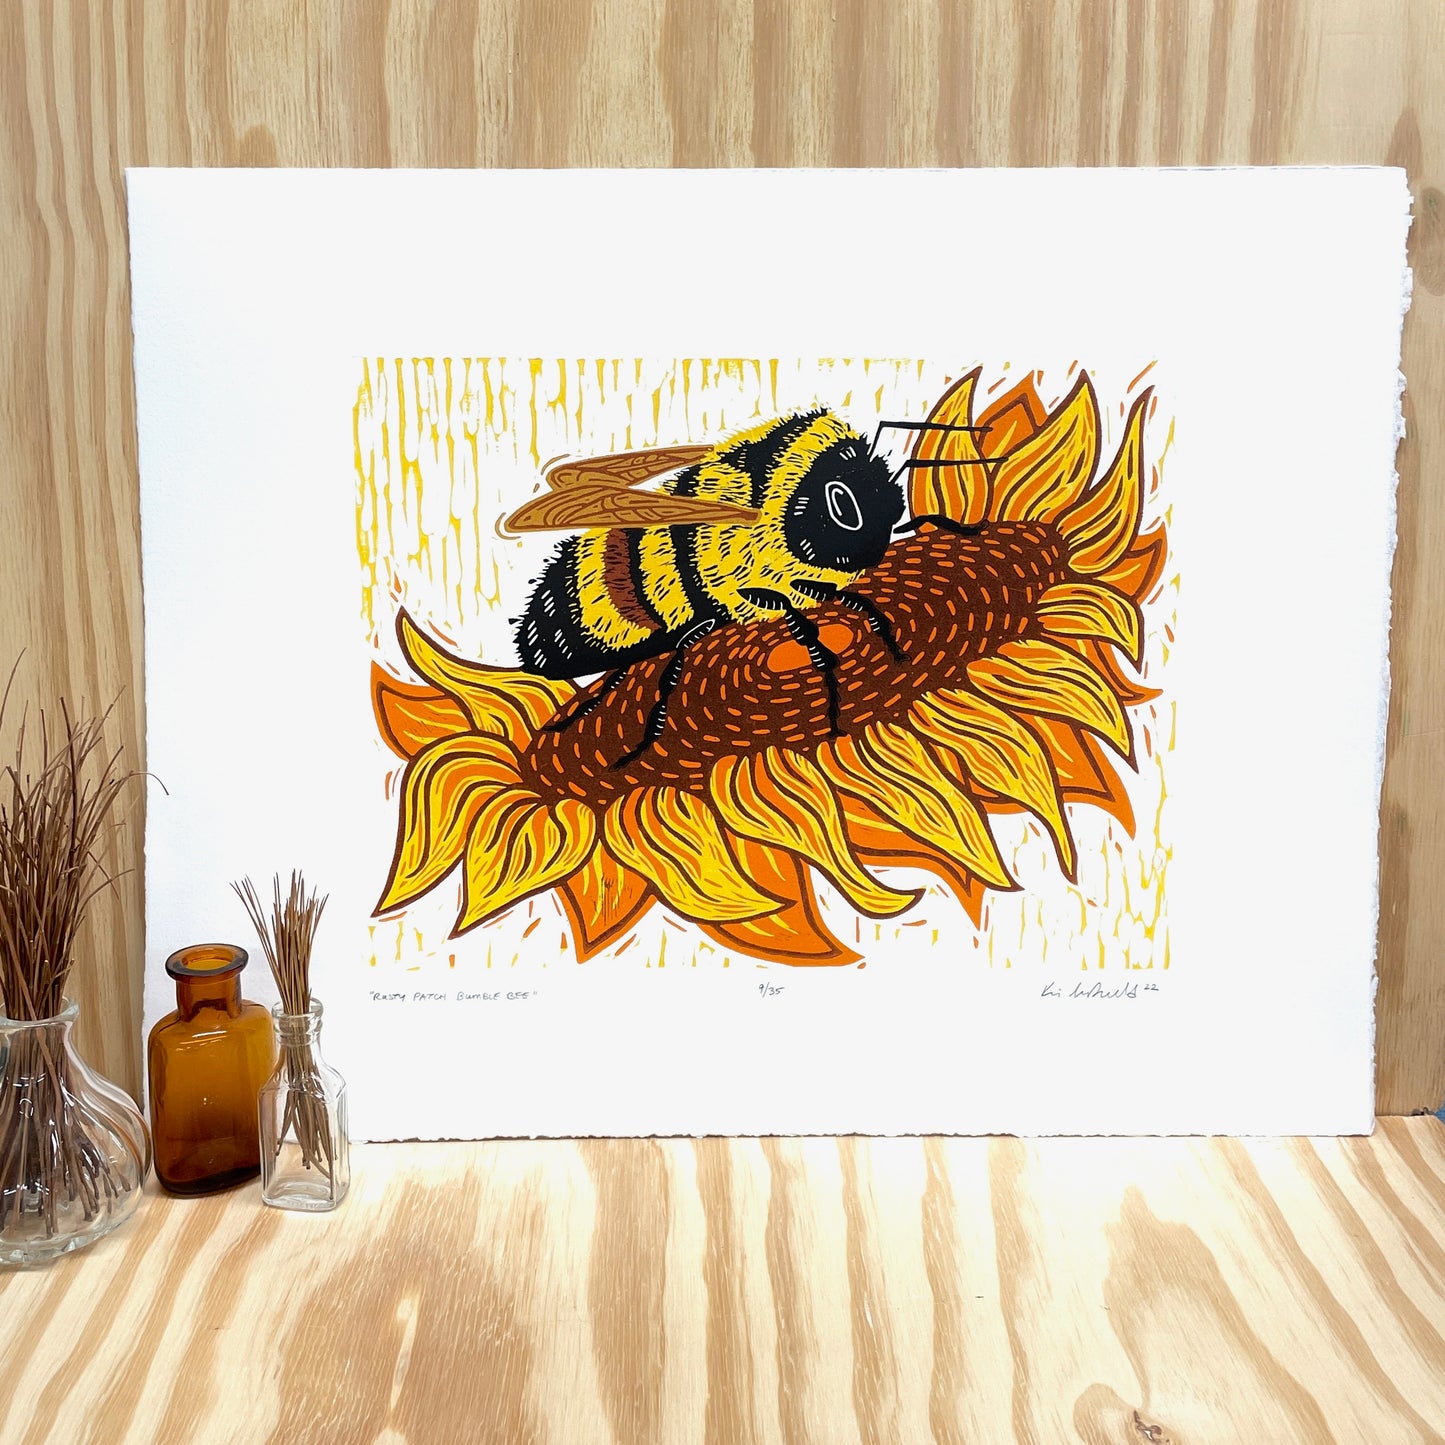 Rusty Patch Bumble Bee - woodblock print - Save Bell Bowl Prairie (14x18")